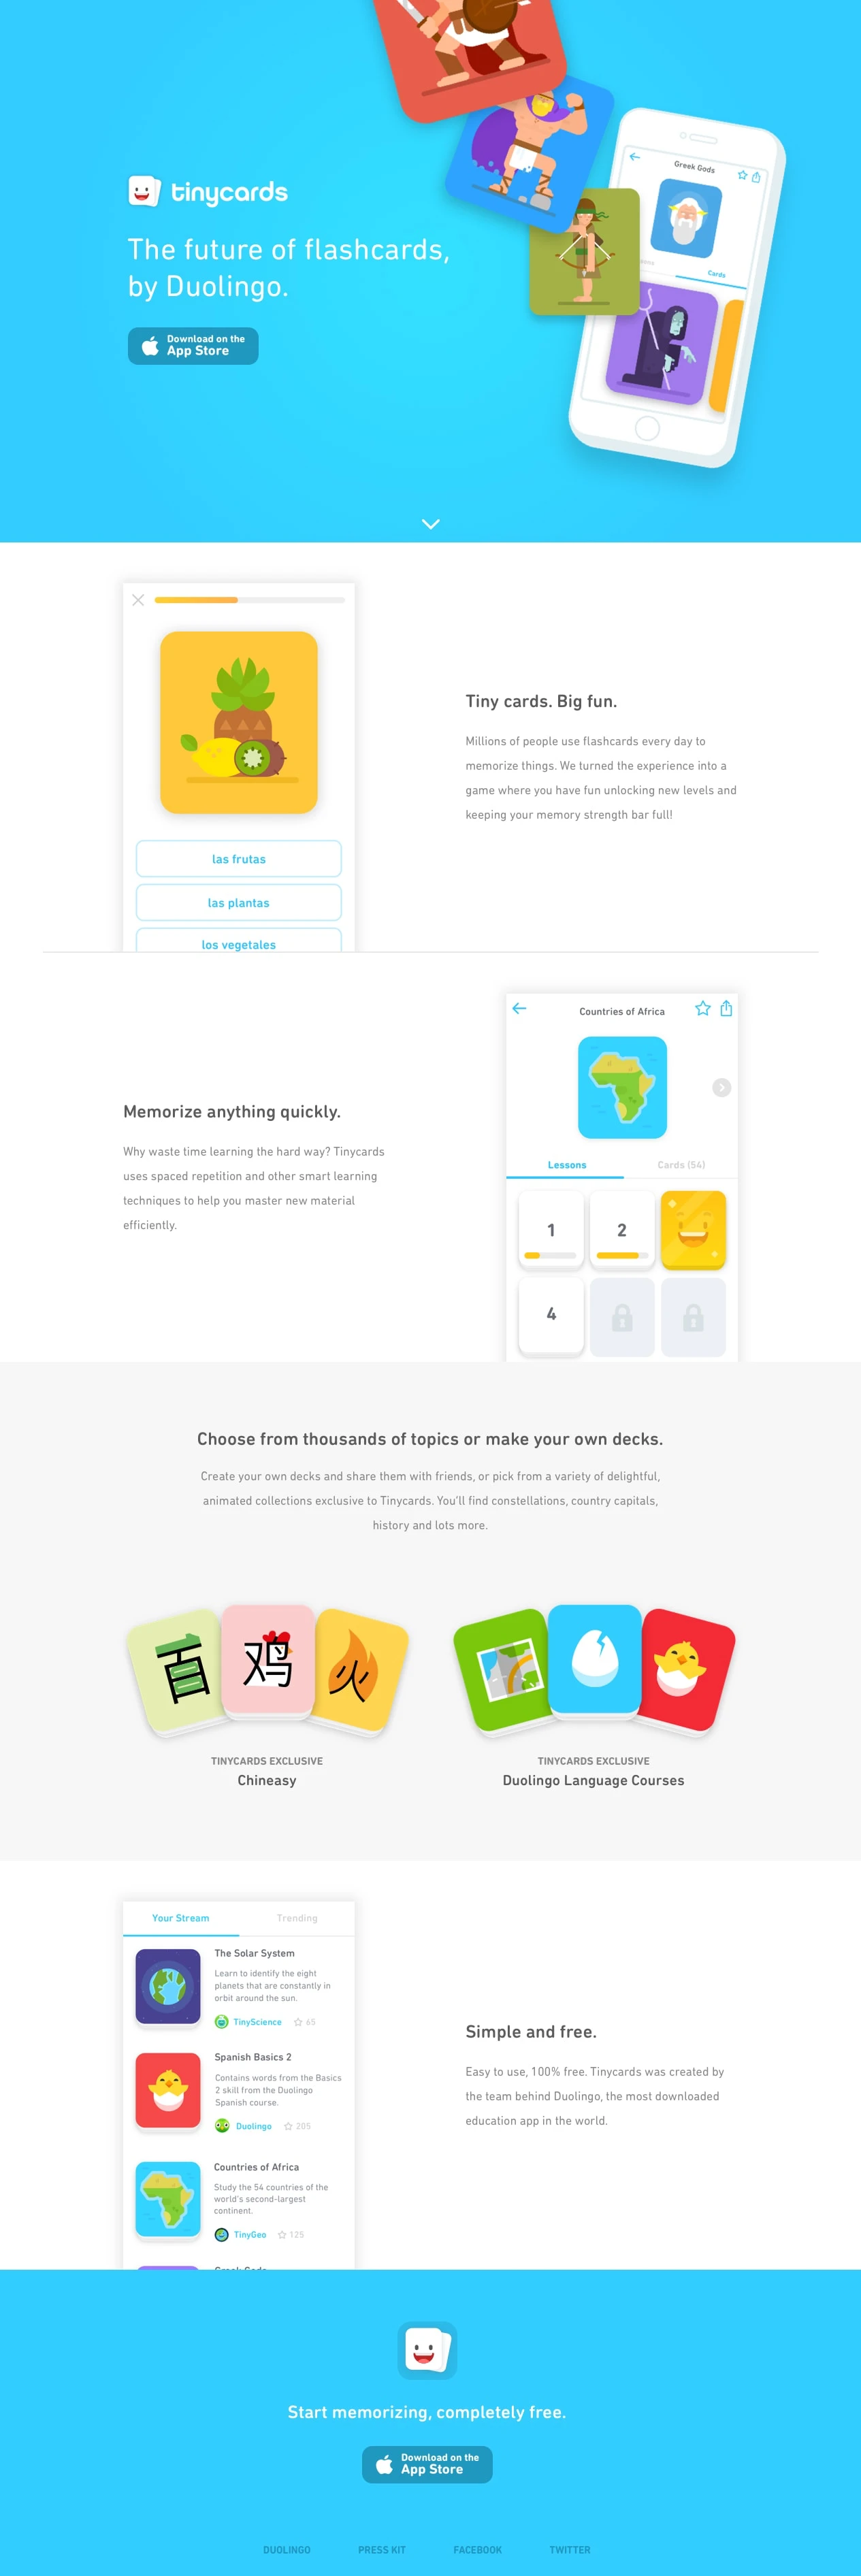 Tinycards Landing Page Example: The future of flashcards, by Duolingo. Millions of people use flashcards every day to memorize things. We turned the experience into a game where you have fun unlocking new levels and keeping your memory strength bar full!